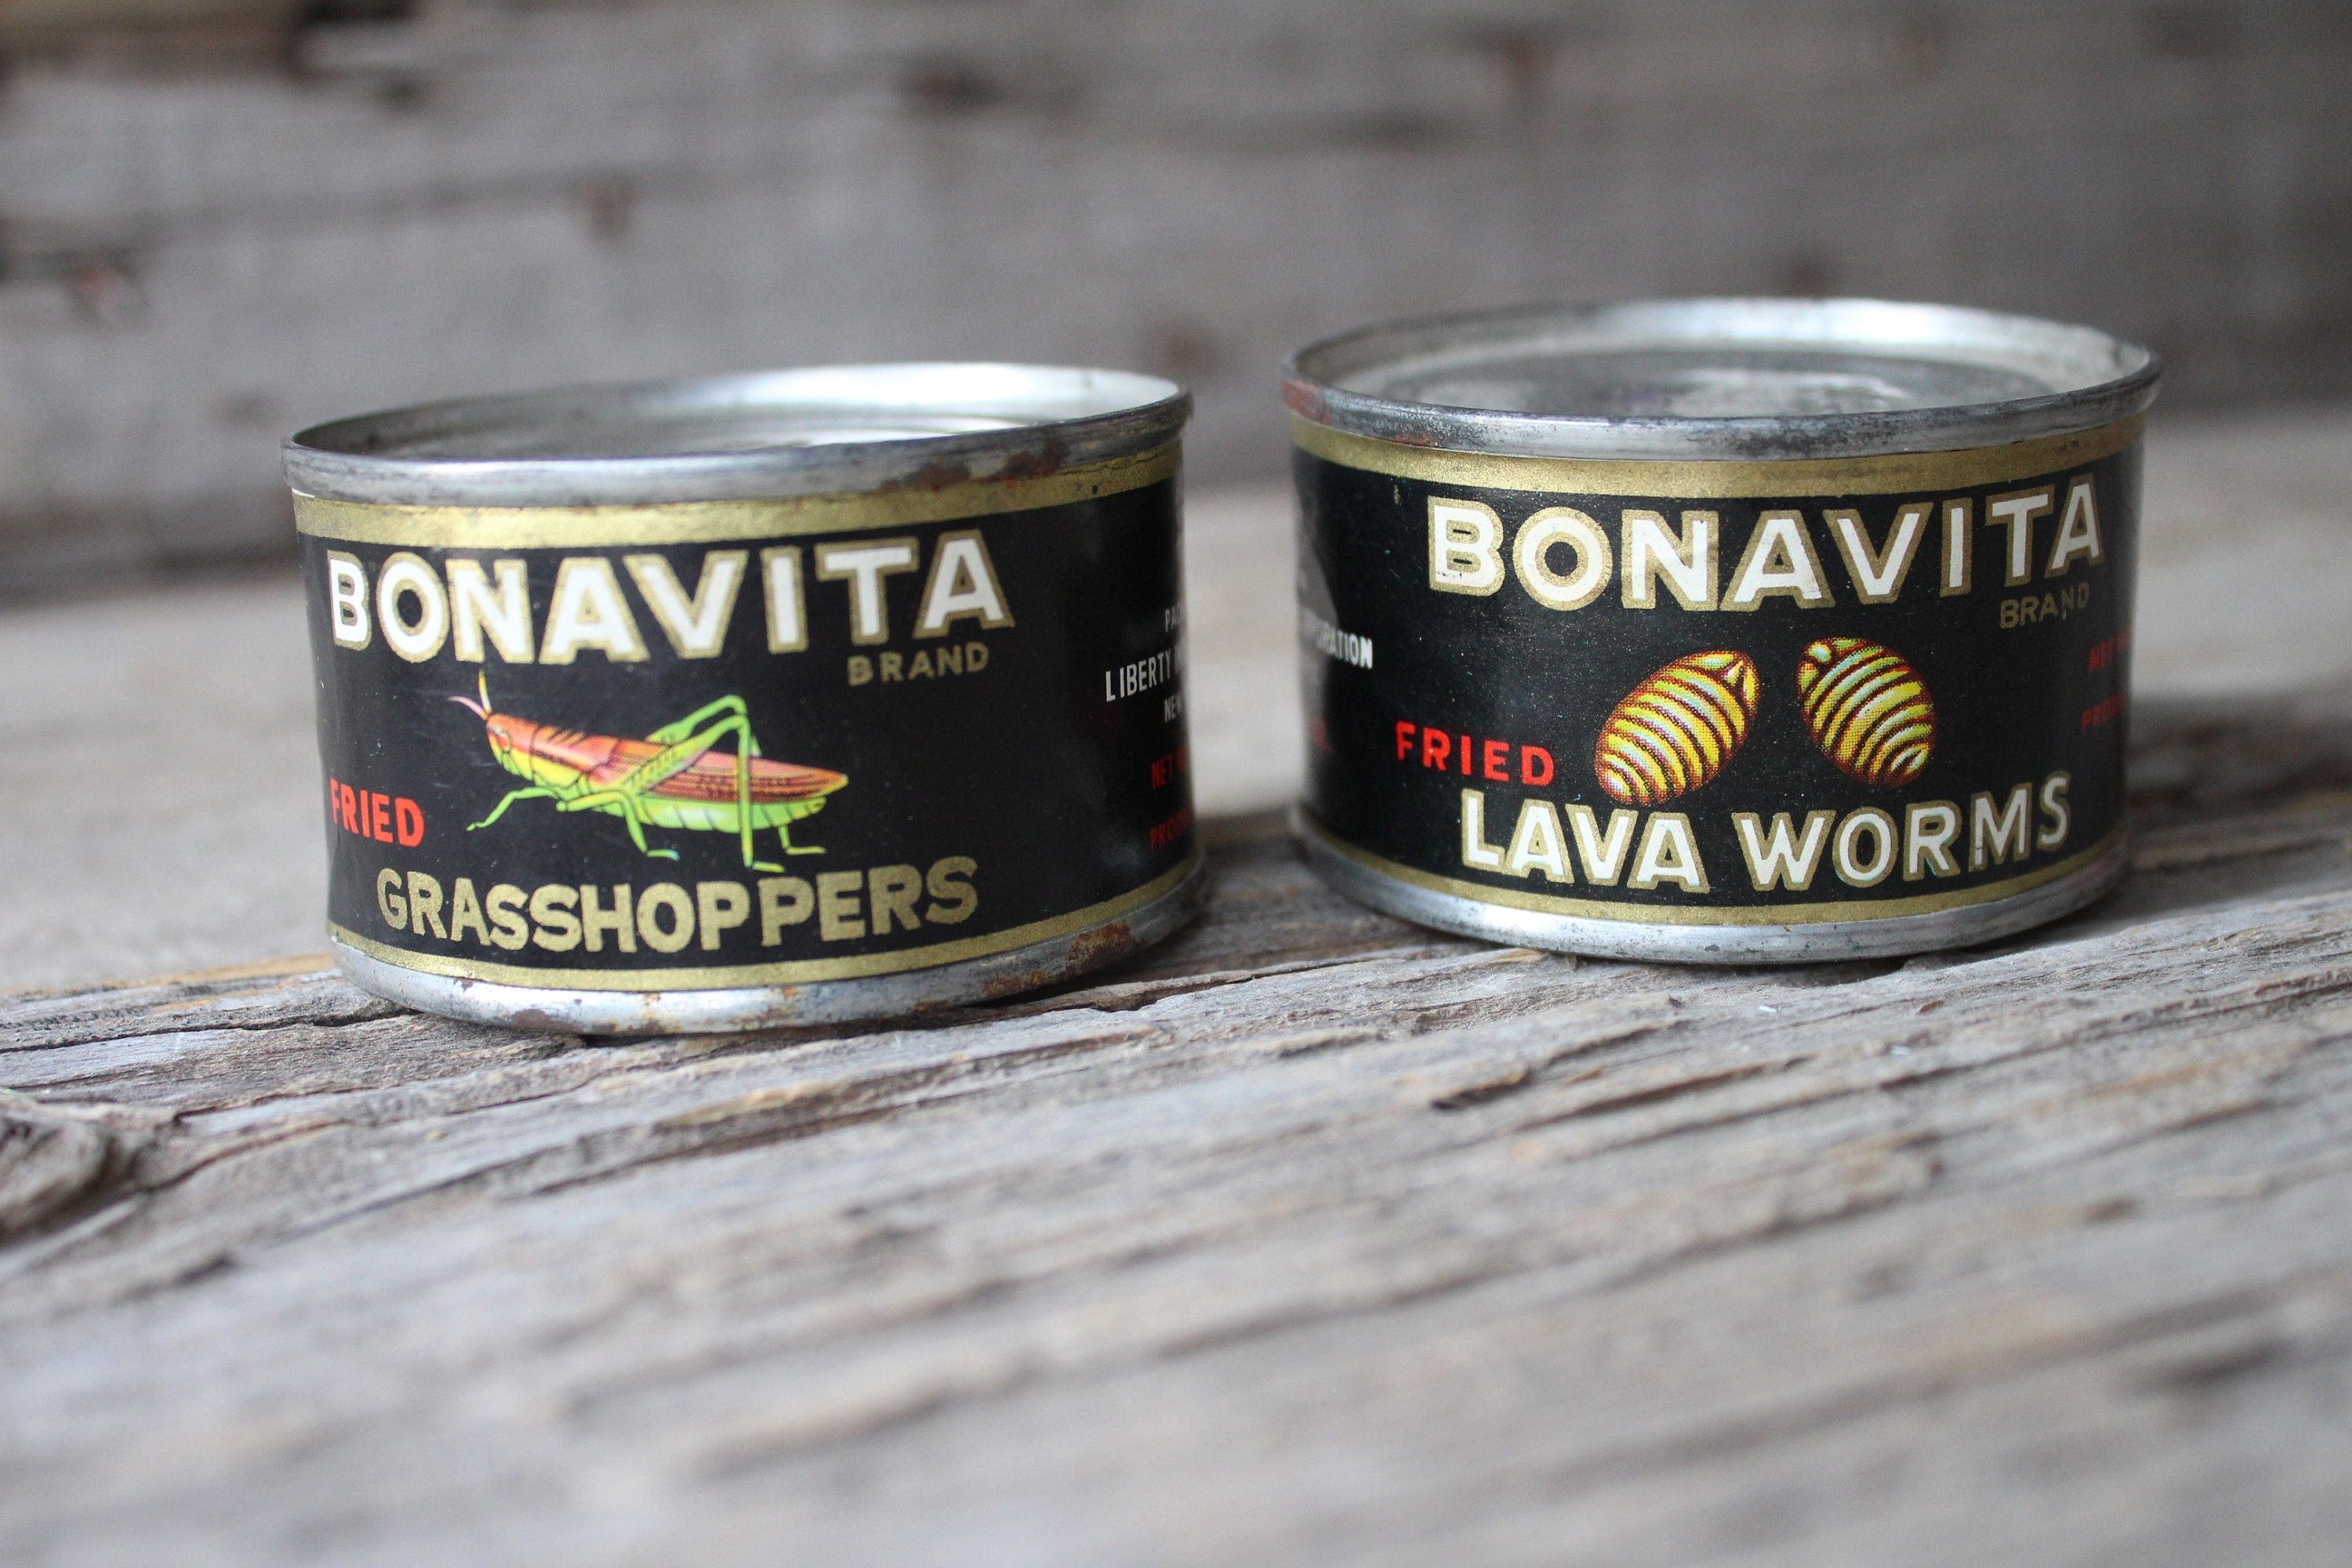 Gourmet Fried Grasshoppers and Lava Worms Vintage Tins Liberty